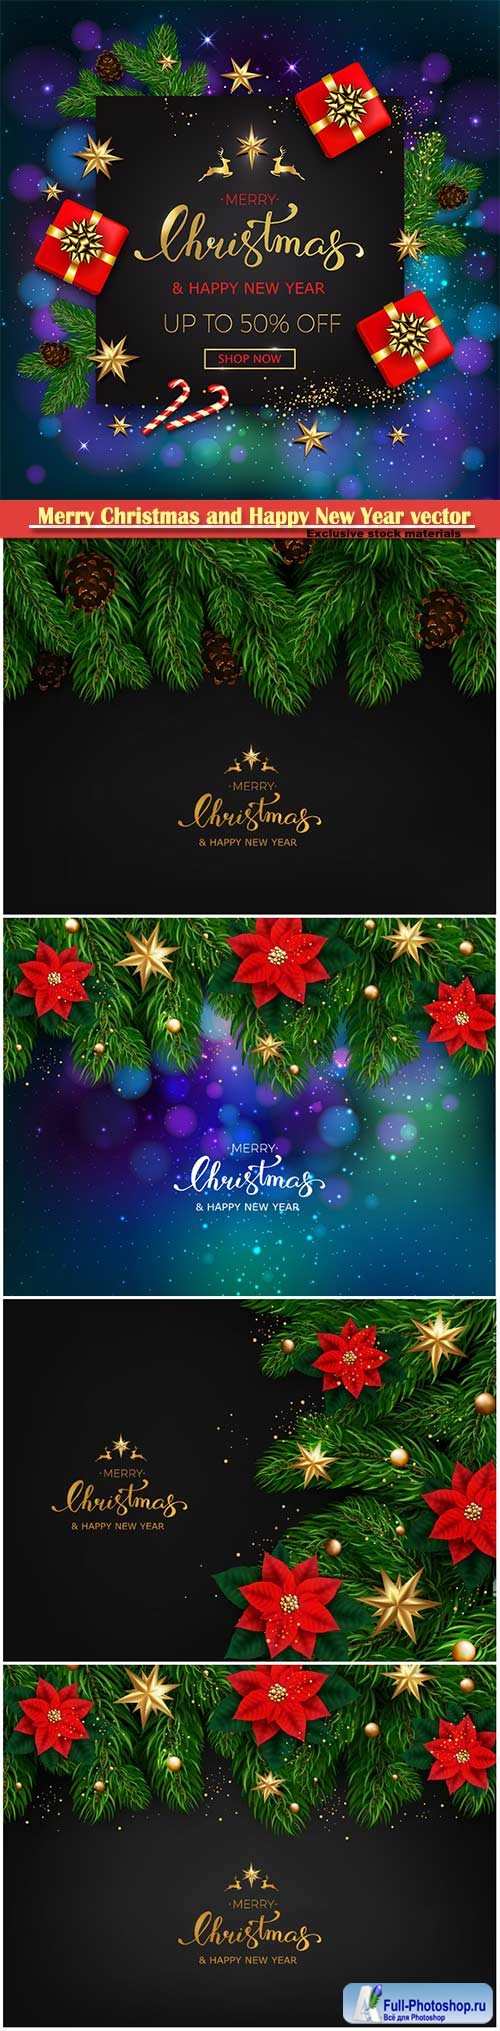 2019 Merry Christmas and Happy New Year vector design # 5